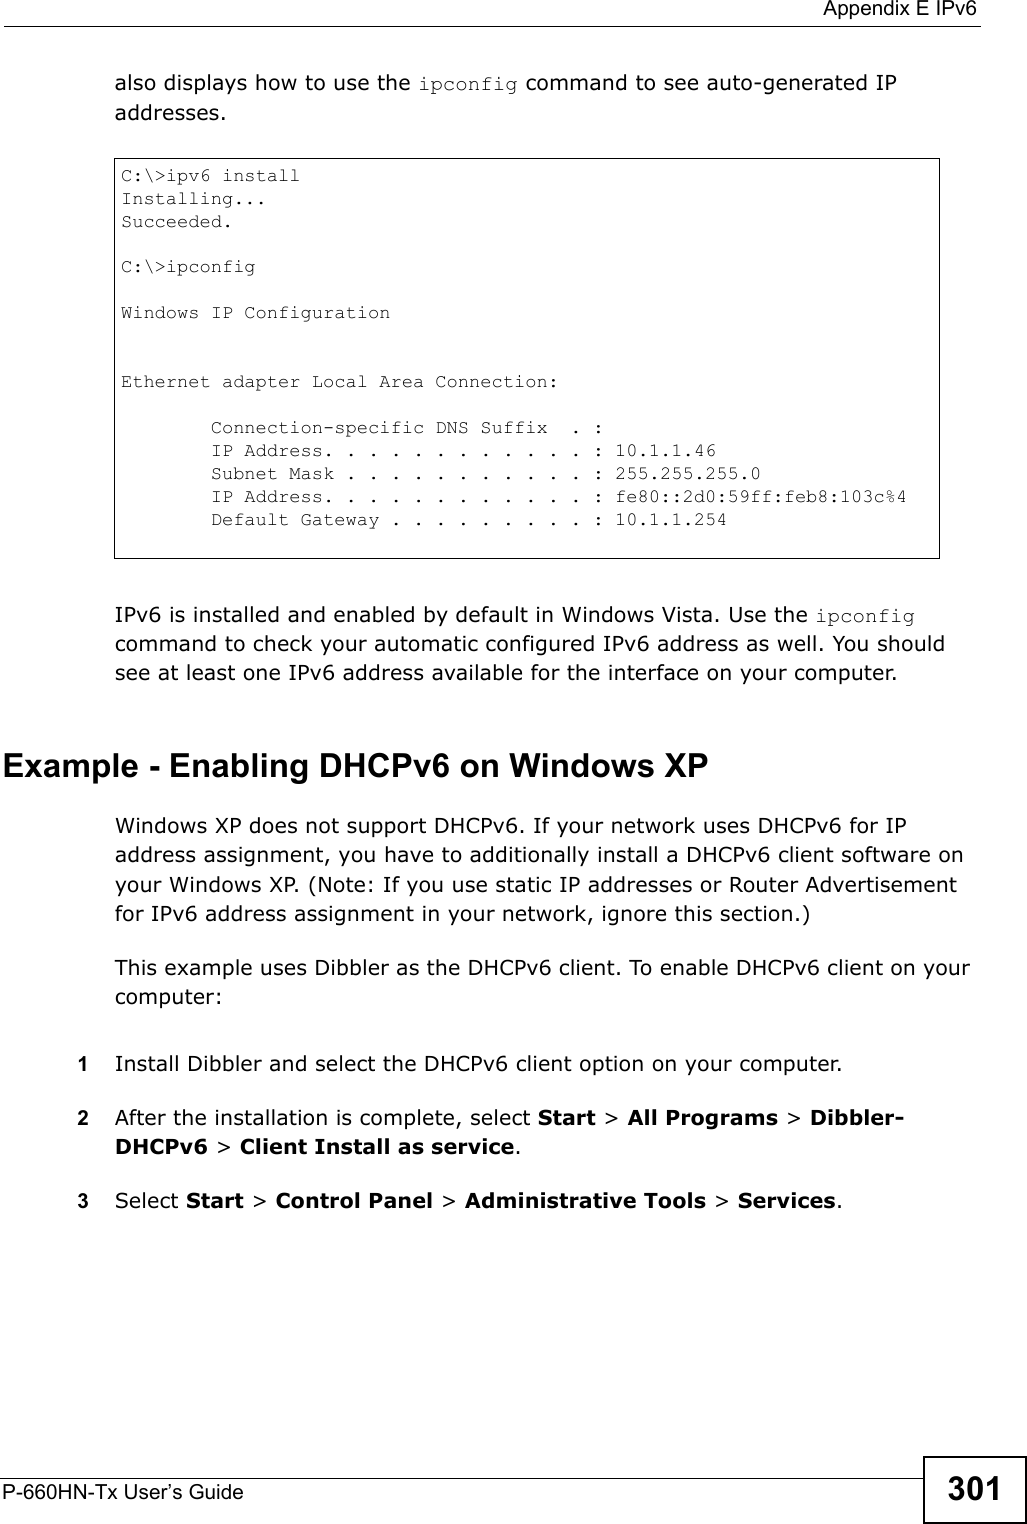  Appendix E IPv6P-660HN-Tx User’s Guide 301also displays how to use the ipconfig command to see auto-generated IP addresses.IPv6 is installed and enabled by default in Windows Vista. Use the ipconfig command to check your automatic configured IPv6 address as well. You should see at least one IPv6 address available for the interface on your computer.Example - Enabling DHCPv6 on Windows XPWindows XP does not support DHCPv6. If your network uses DHCPv6 for IP address assignment, you have to additionally install a DHCPv6 client software on your Windows XP. (Note: If you use static IP addresses or Router Advertisement for IPv6 address assignment in your network, ignore this section.)This example uses Dibbler as the DHCPv6 client. To enable DHCPv6 client on your computer:1Install Dibbler and select the DHCPv6 client option on your computer.2After the installation is complete, select Start &gt; All Programs &gt; Dibbler-DHCPv6 &gt; Client Install as service.3Select Start &gt; Control Panel &gt; Administrative Tools &gt; Services.C:\&gt;ipv6 installInstalling...Succeeded.C:\&gt;ipconfigWindows IP ConfigurationEthernet adapter Local Area Connection:        Connection-specific DNS Suffix  . :         IP Address. . . . . . . . . . . . : 10.1.1.46        Subnet Mask . . . . . . . . . . . : 255.255.255.0        IP Address. . . . . . . . . . . . : fe80::2d0:59ff:feb8:103c%4        Default Gateway . . . . . . . . . : 10.1.1.254